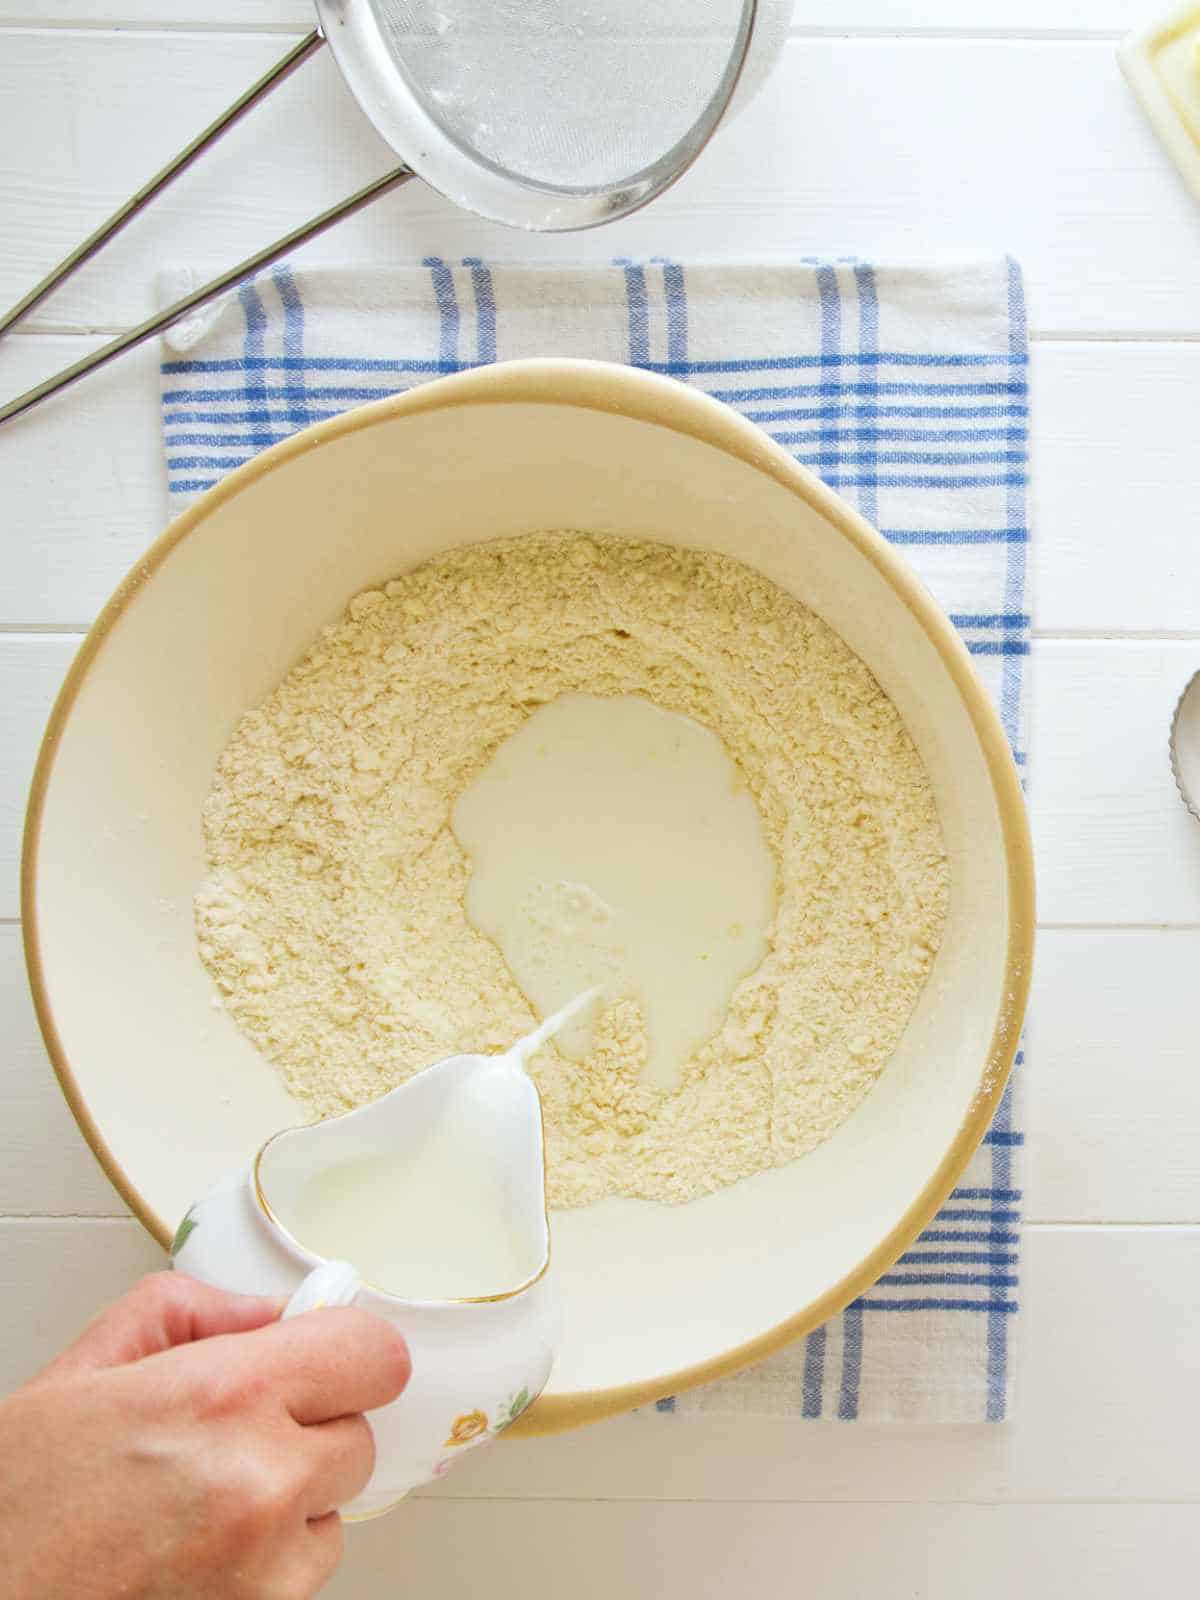 milk being added to bowl of flour.